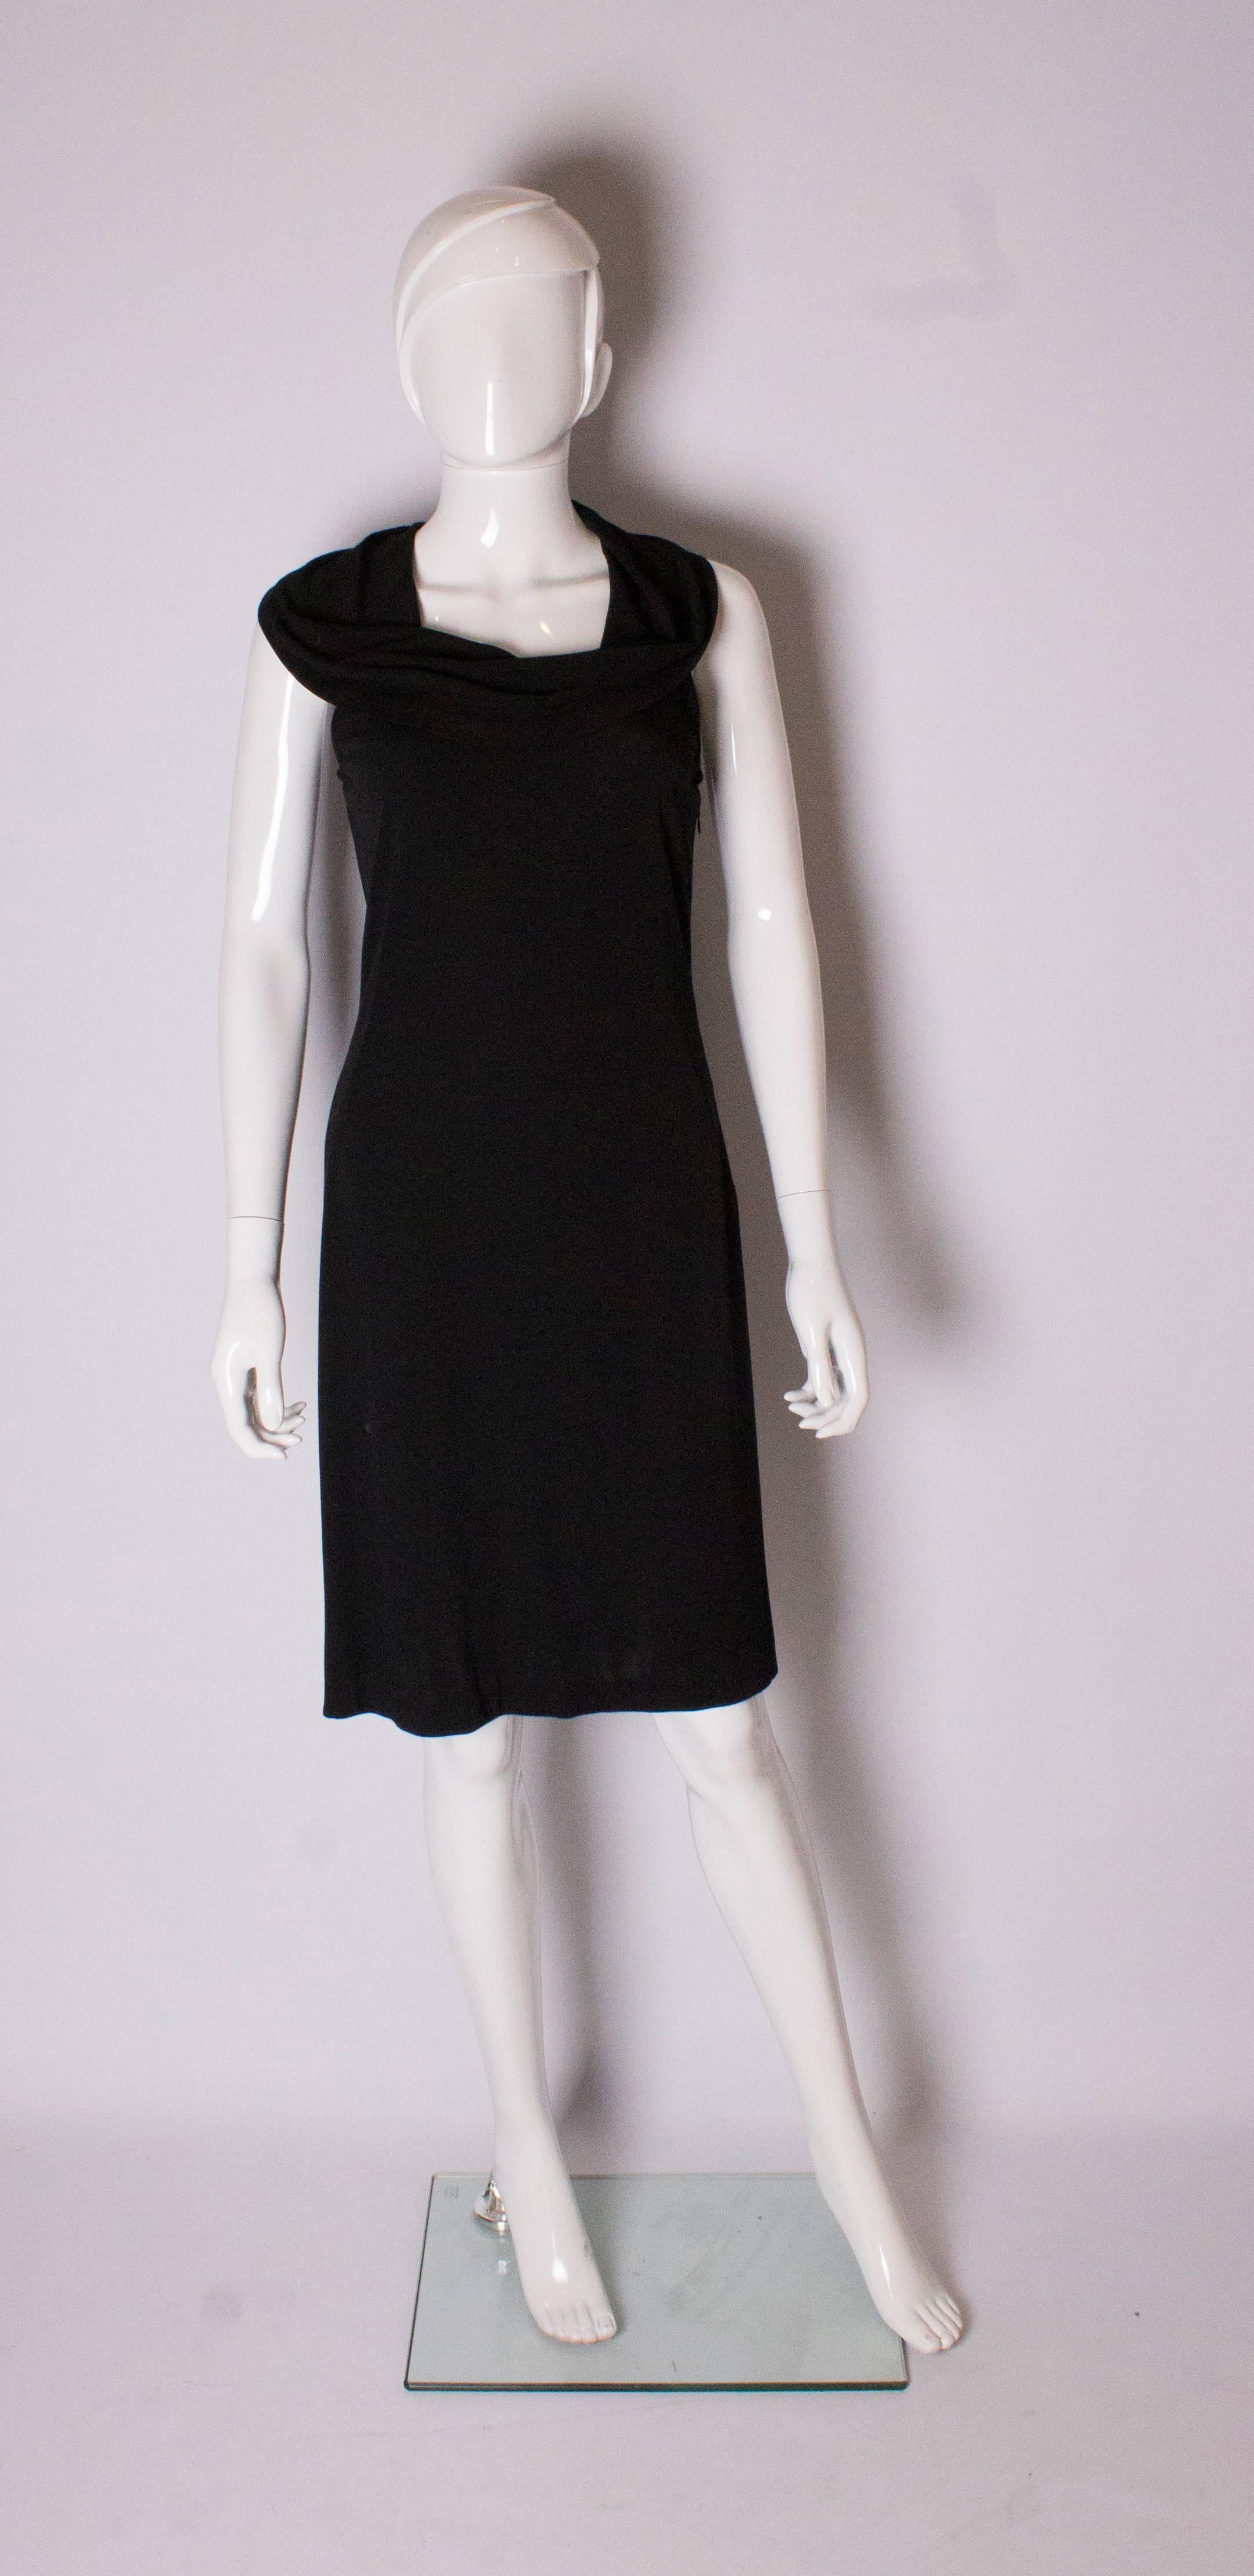 A chic cocktail dres by Oscar de la Renta. The dress is sleeeless, has a deep cowl neck and a side zip.